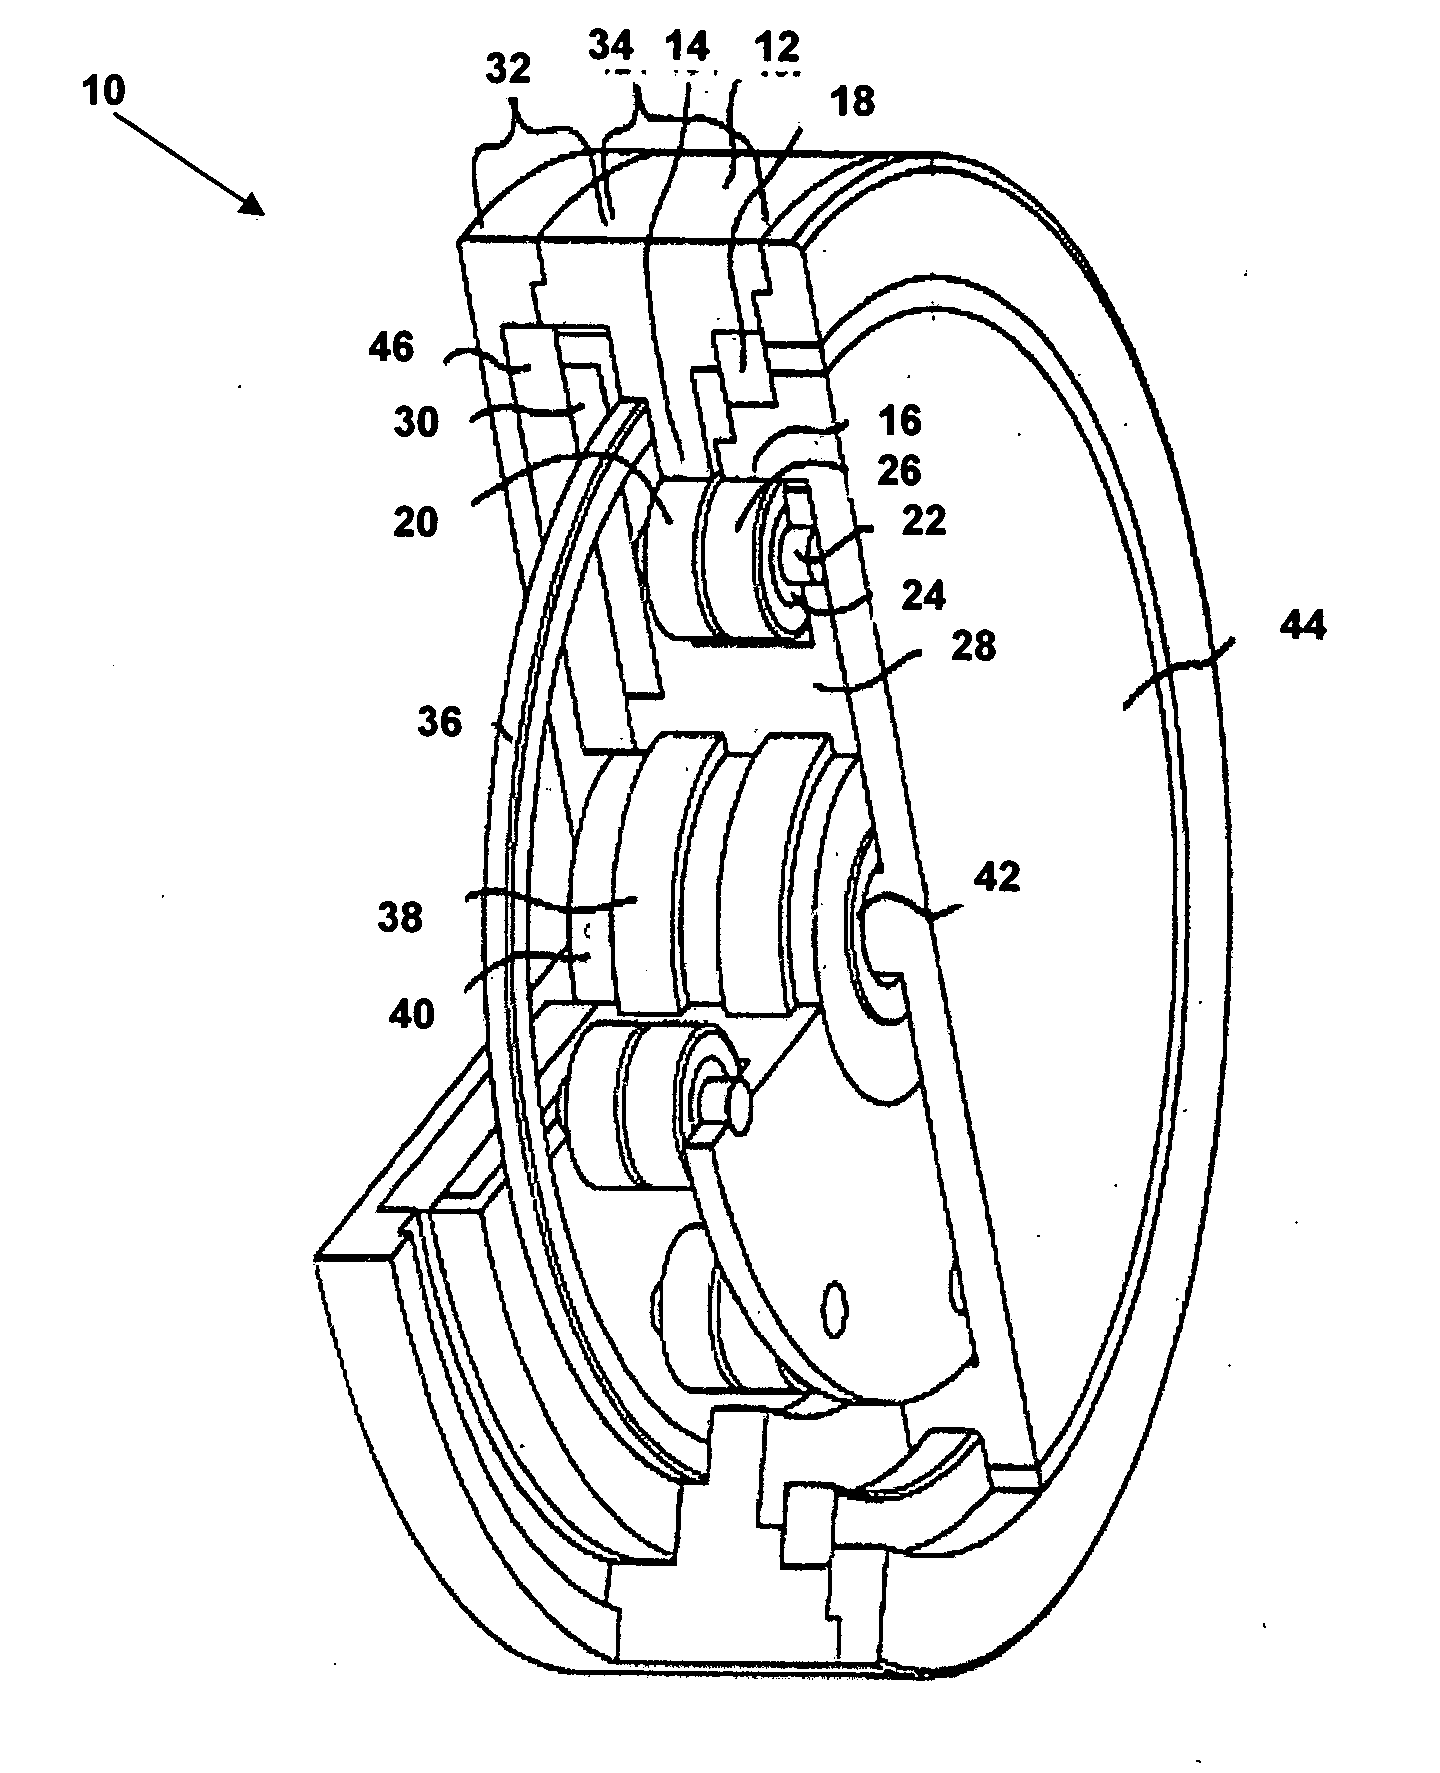 Self-contained rotary actuator